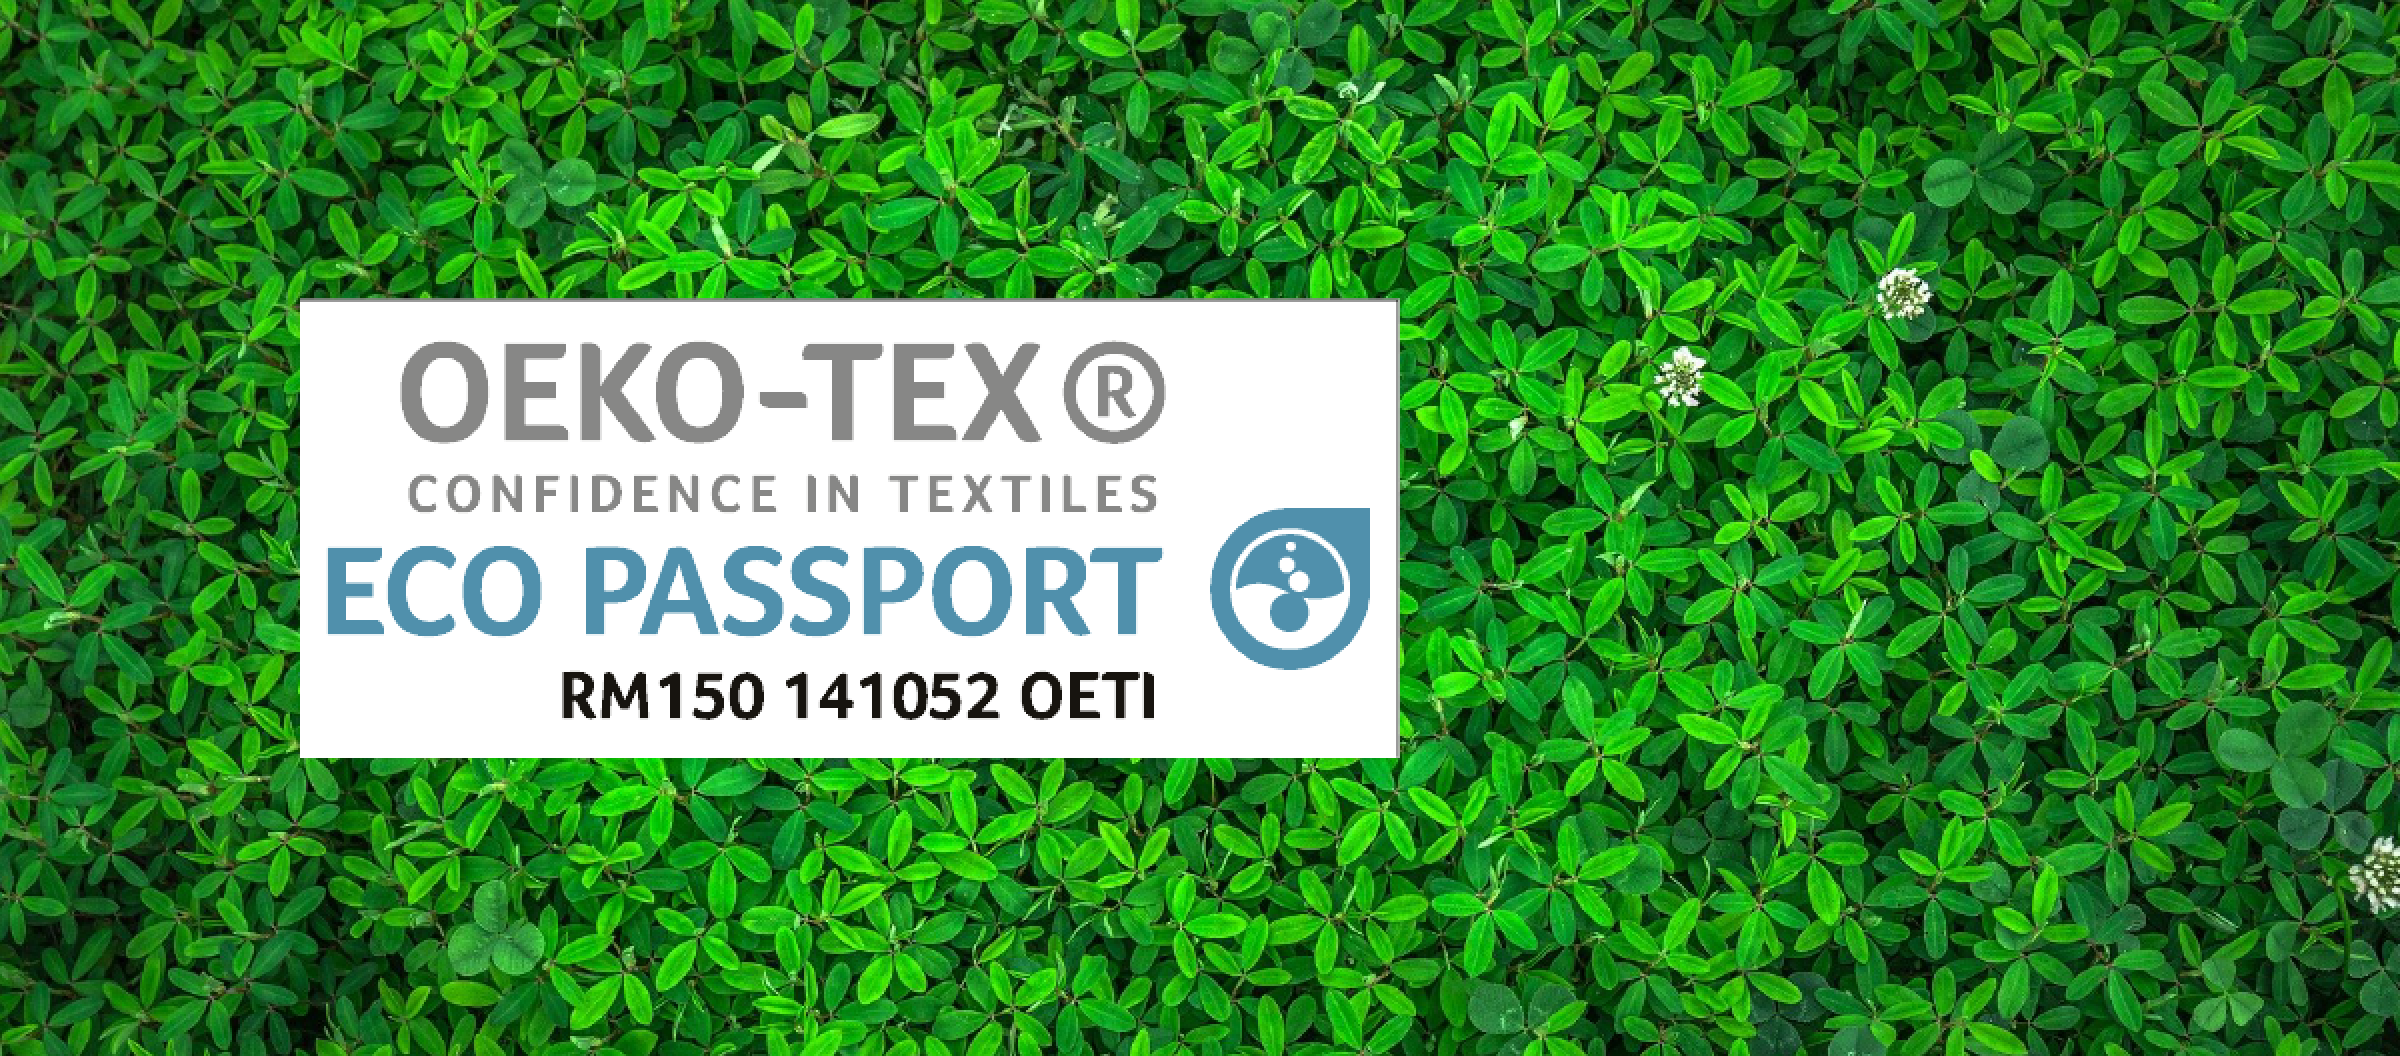 ECO-PASSPORT by OEKO-TEX® certificate Archives - Spinks world